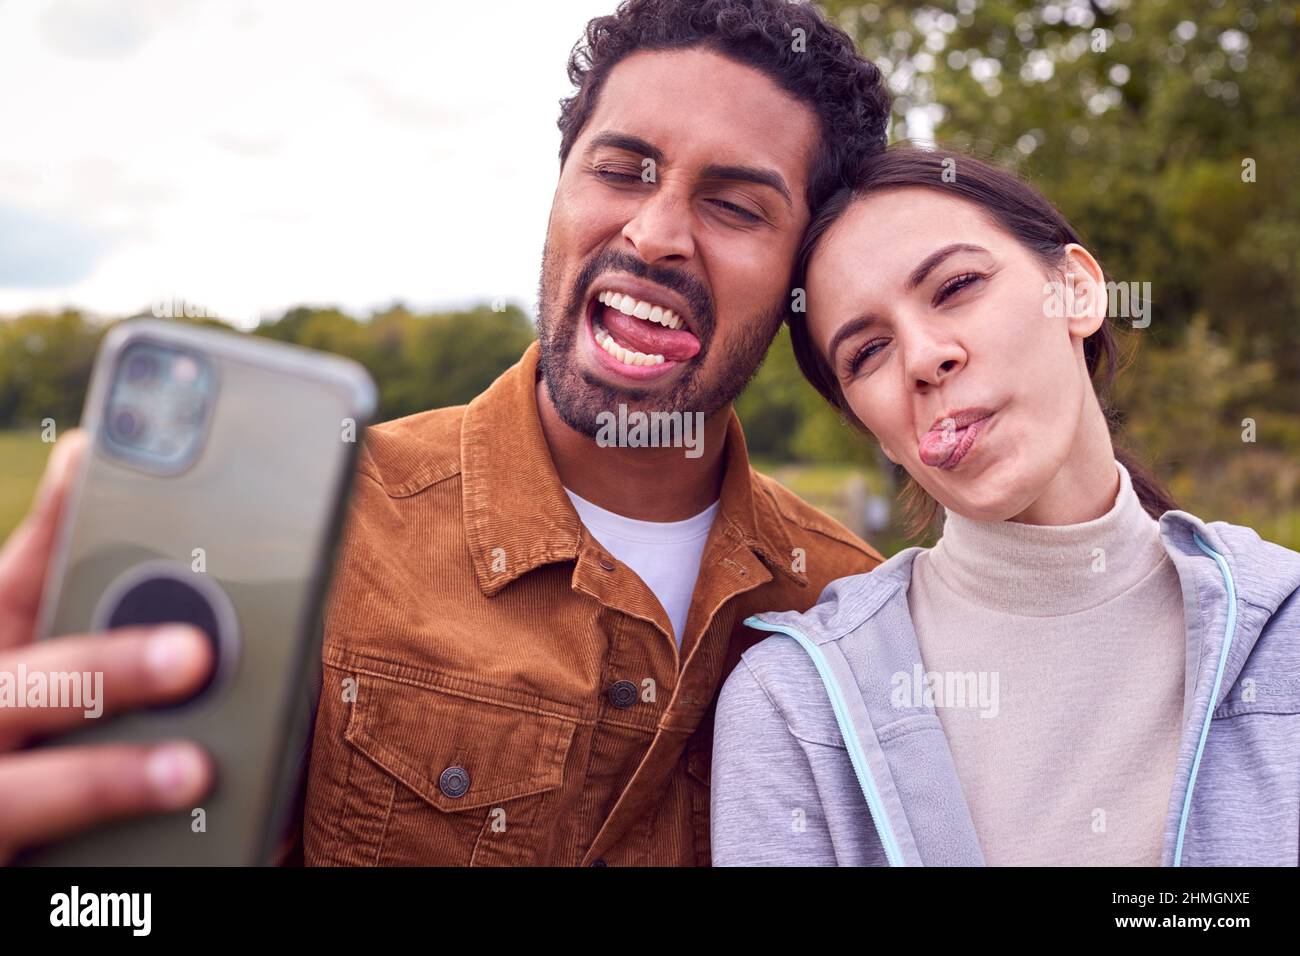 Couple On Walk In Countryside Pulling Funny Faces As They Take Selfie On Mobile Phone Stock Photo